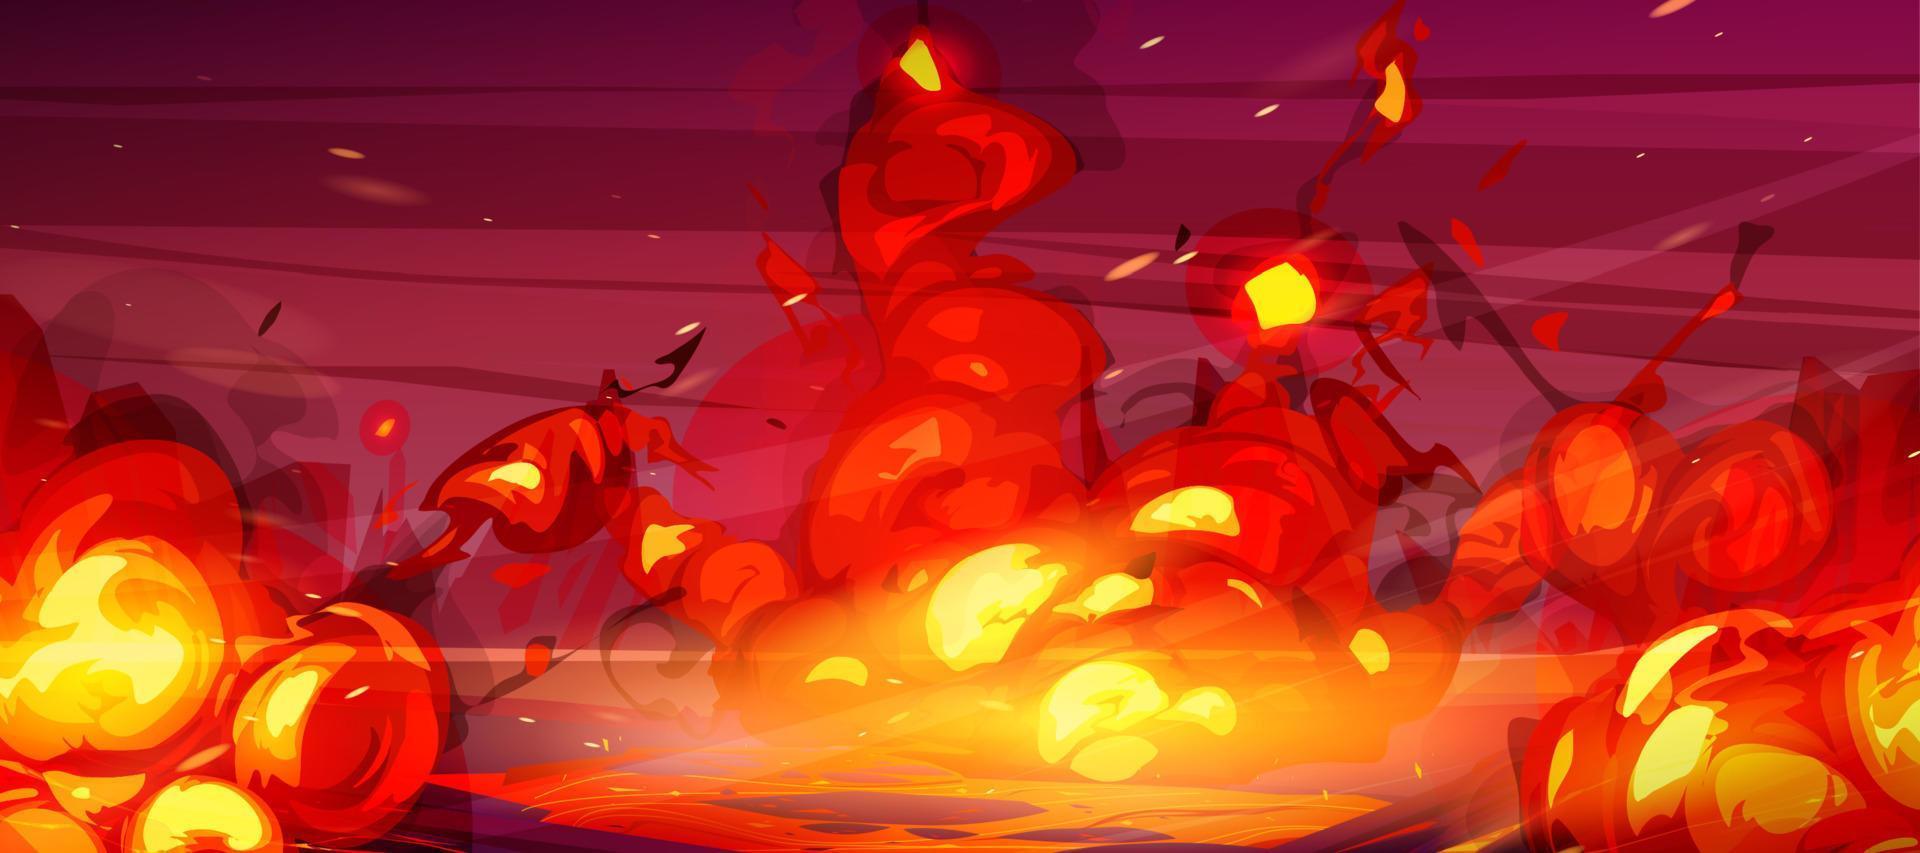 Fire background, cartoon red bomb explosion vector